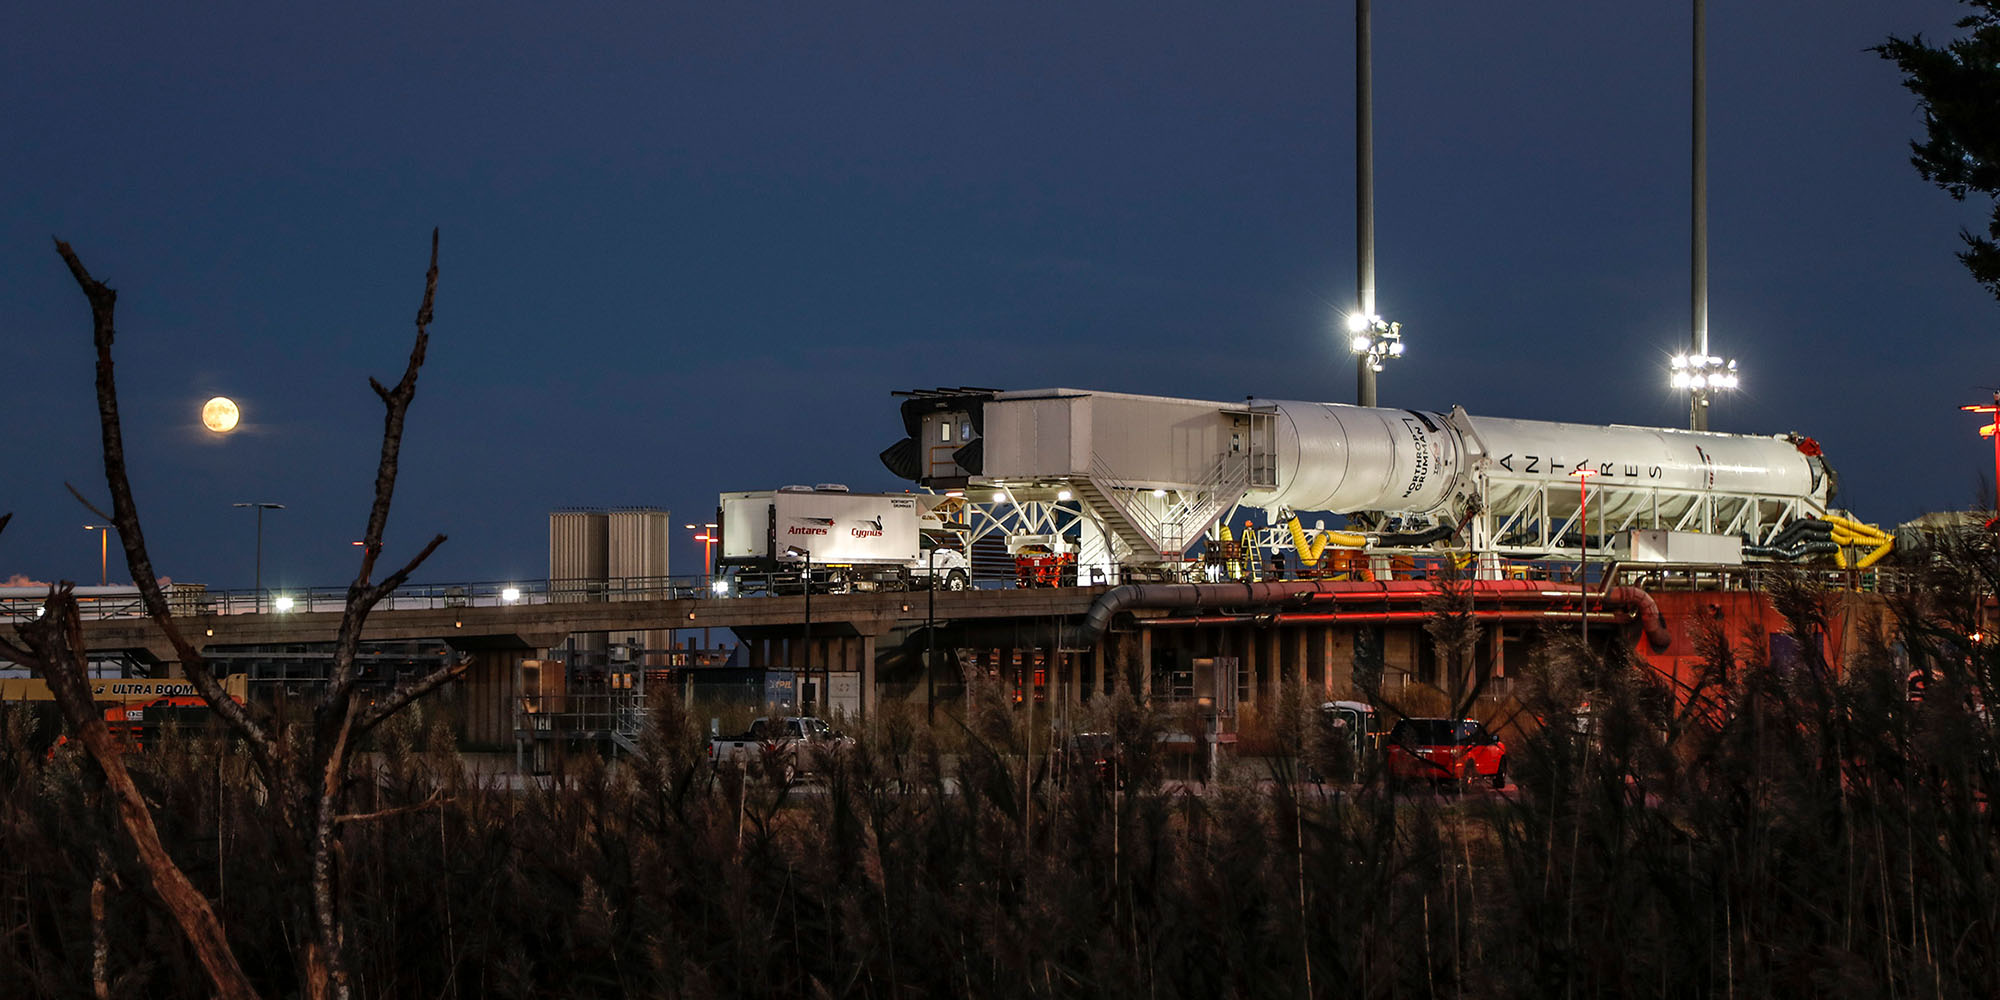 Night shot with moon of the Antares Rocket belly up on launchpad in Wallops Island, Virginia